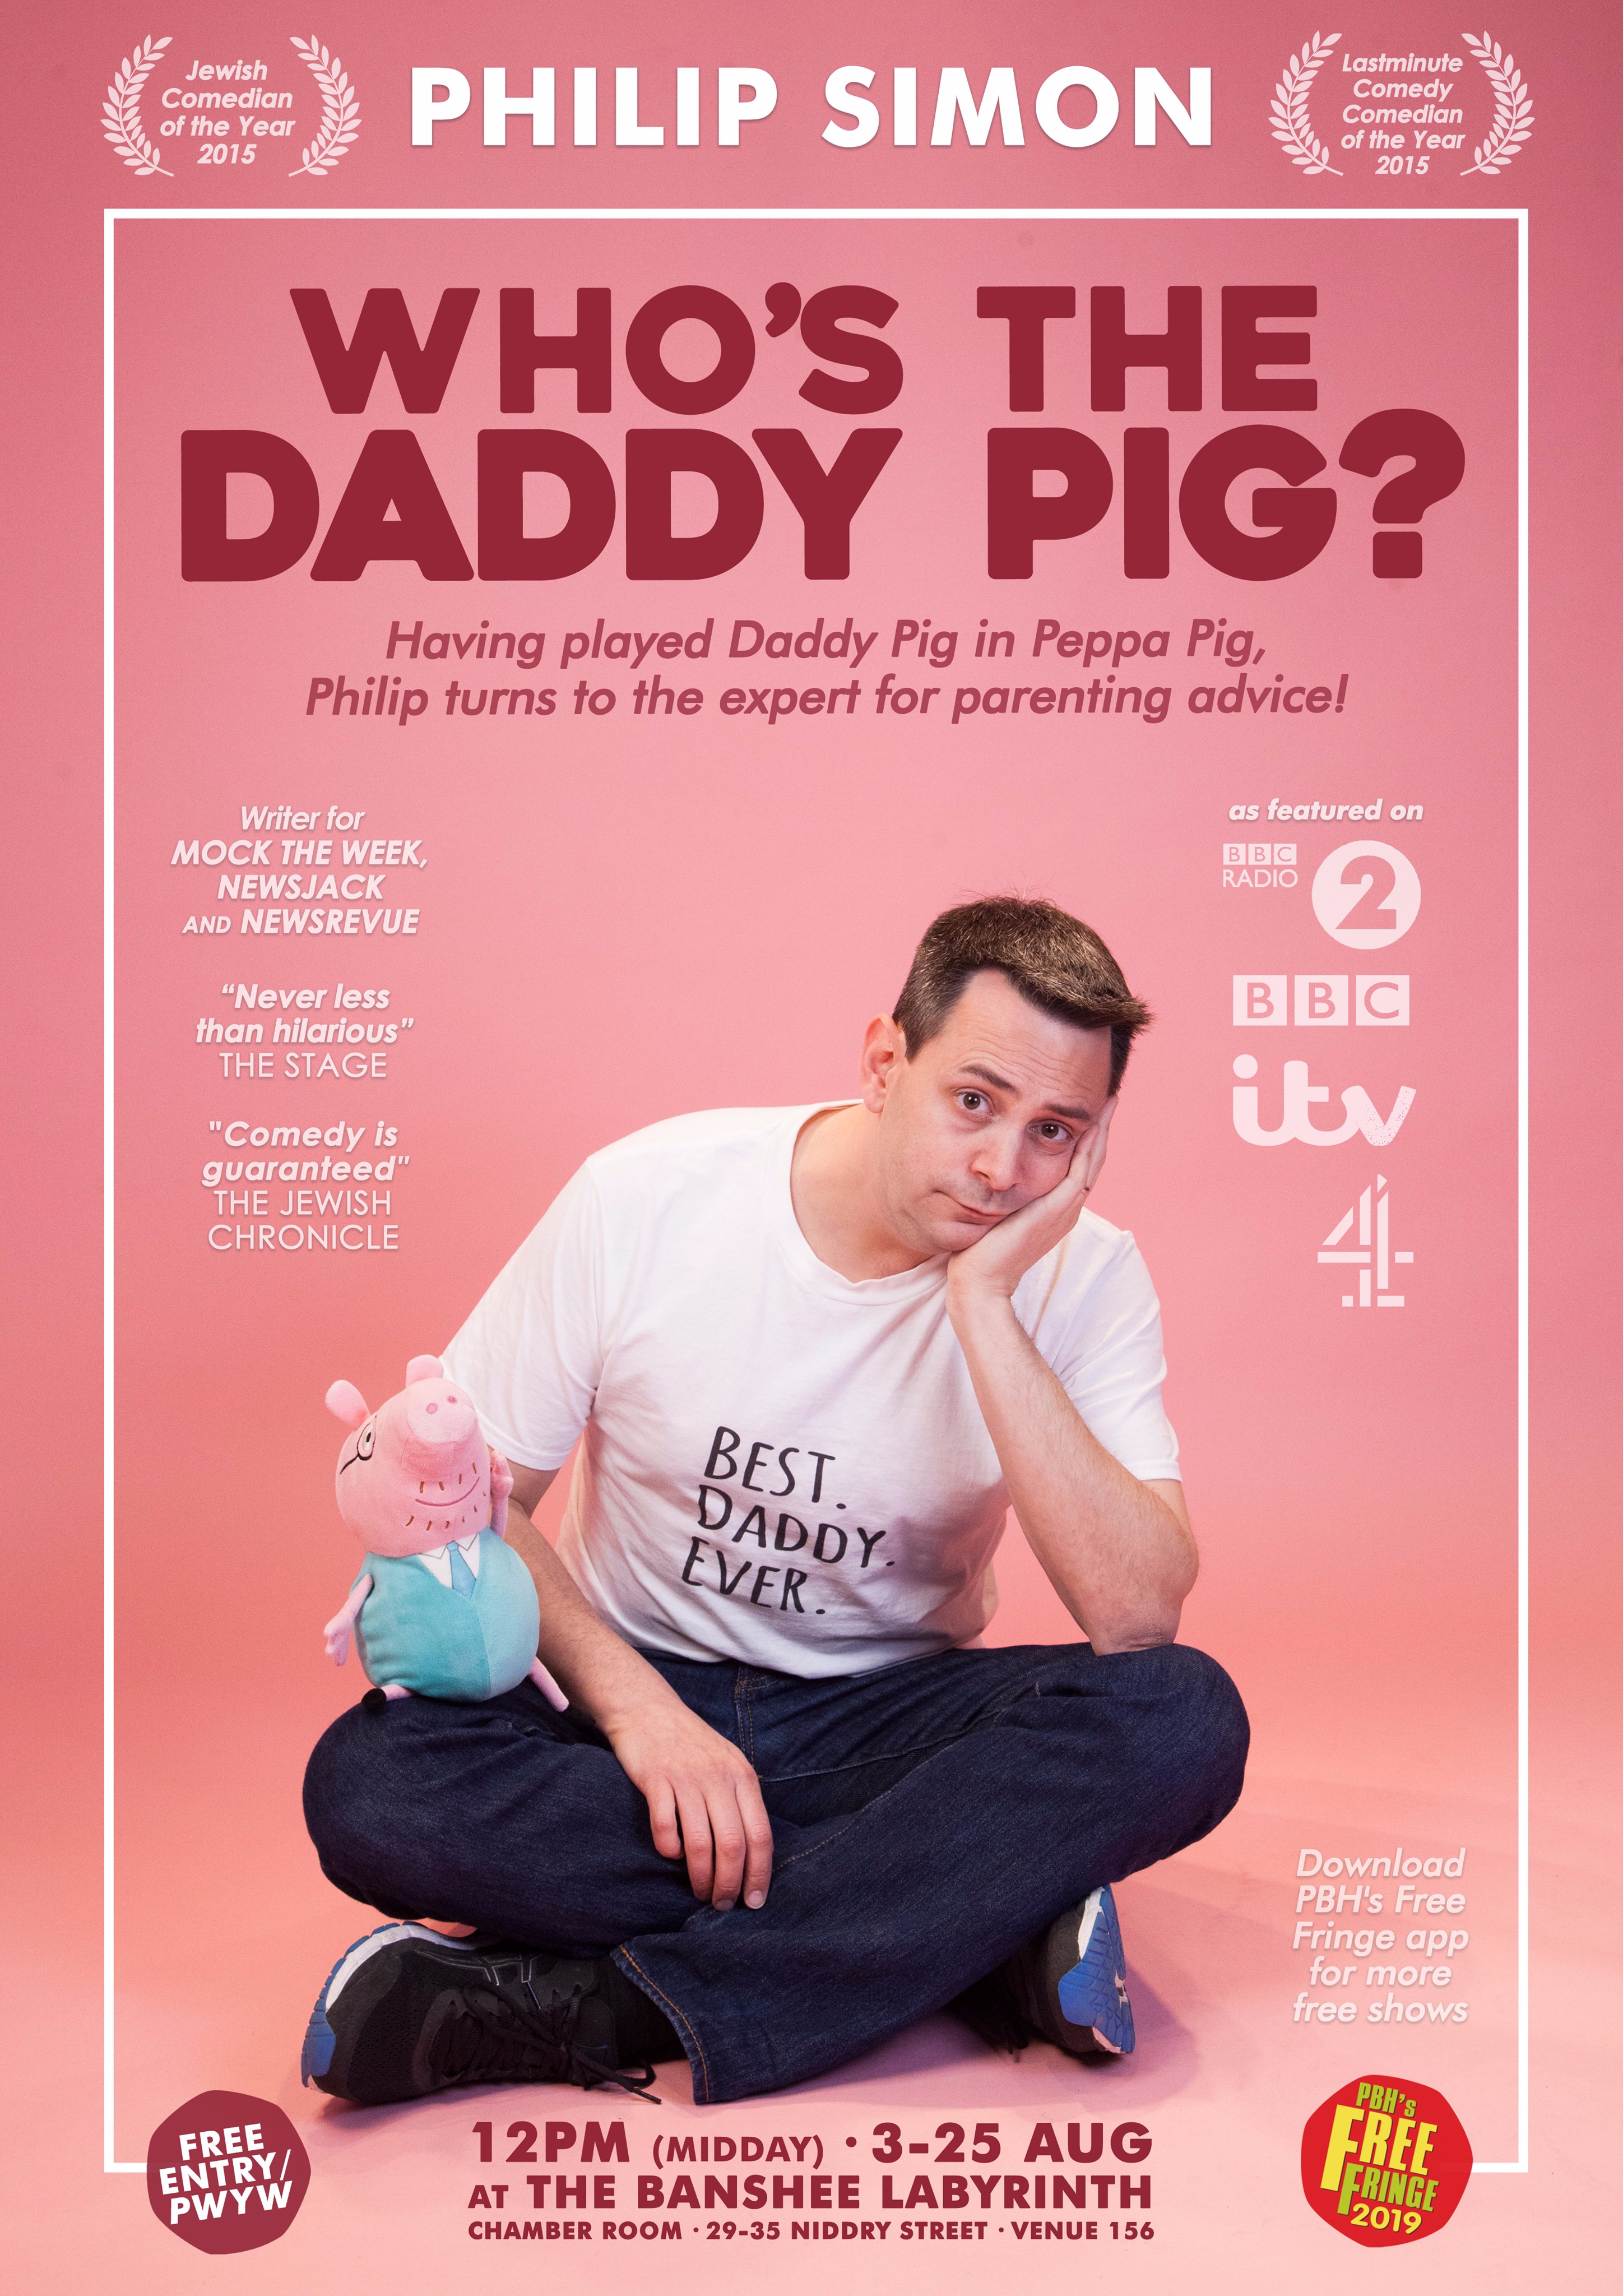 The poster for Who's the Daddy Pig?